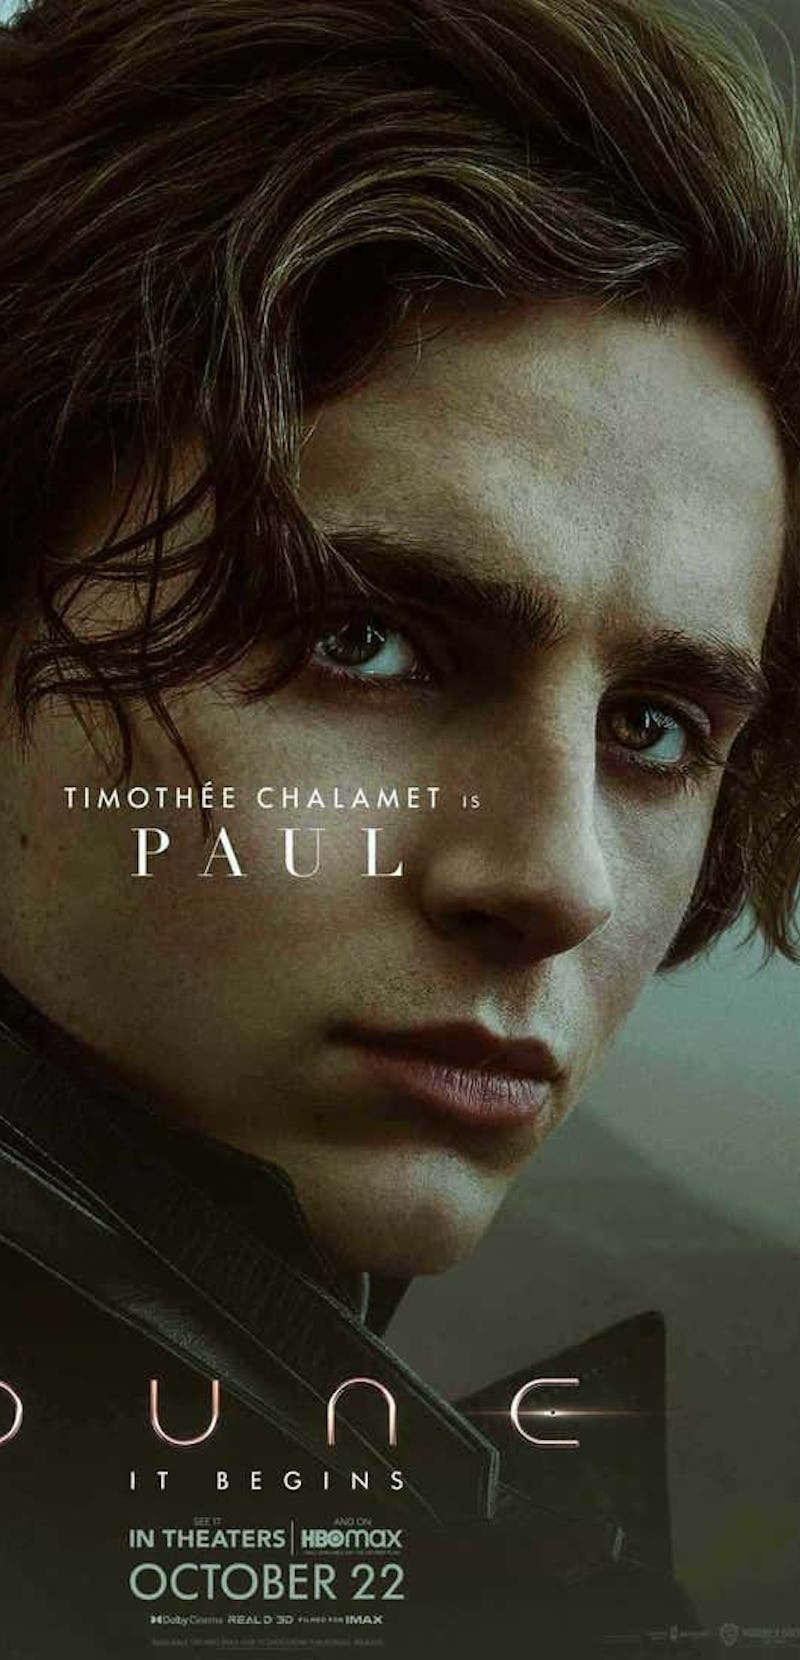 A close-up portrait of Timothee Chalamet as Paul in Dune